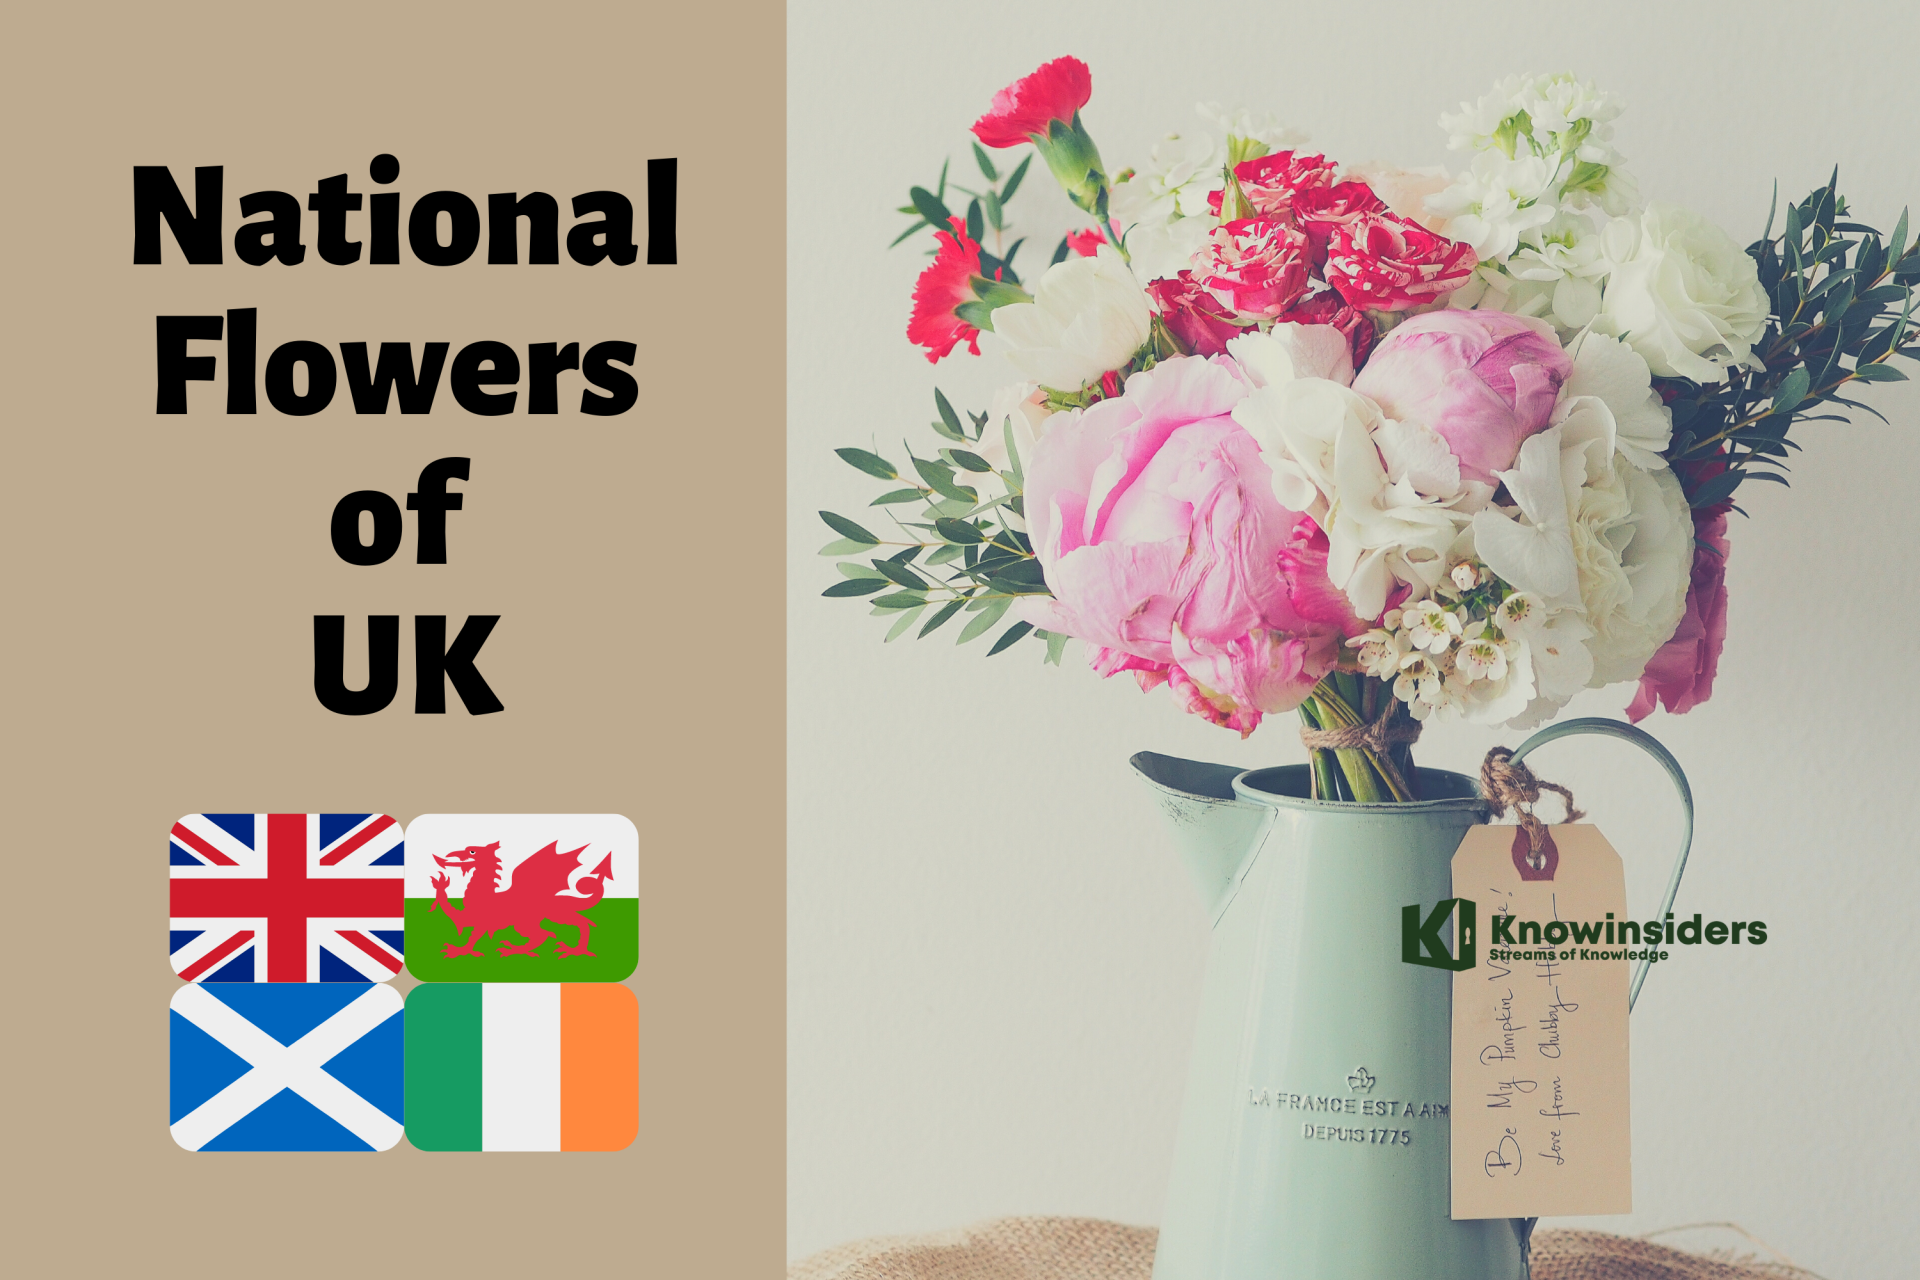 What are the National Flowers of UK?